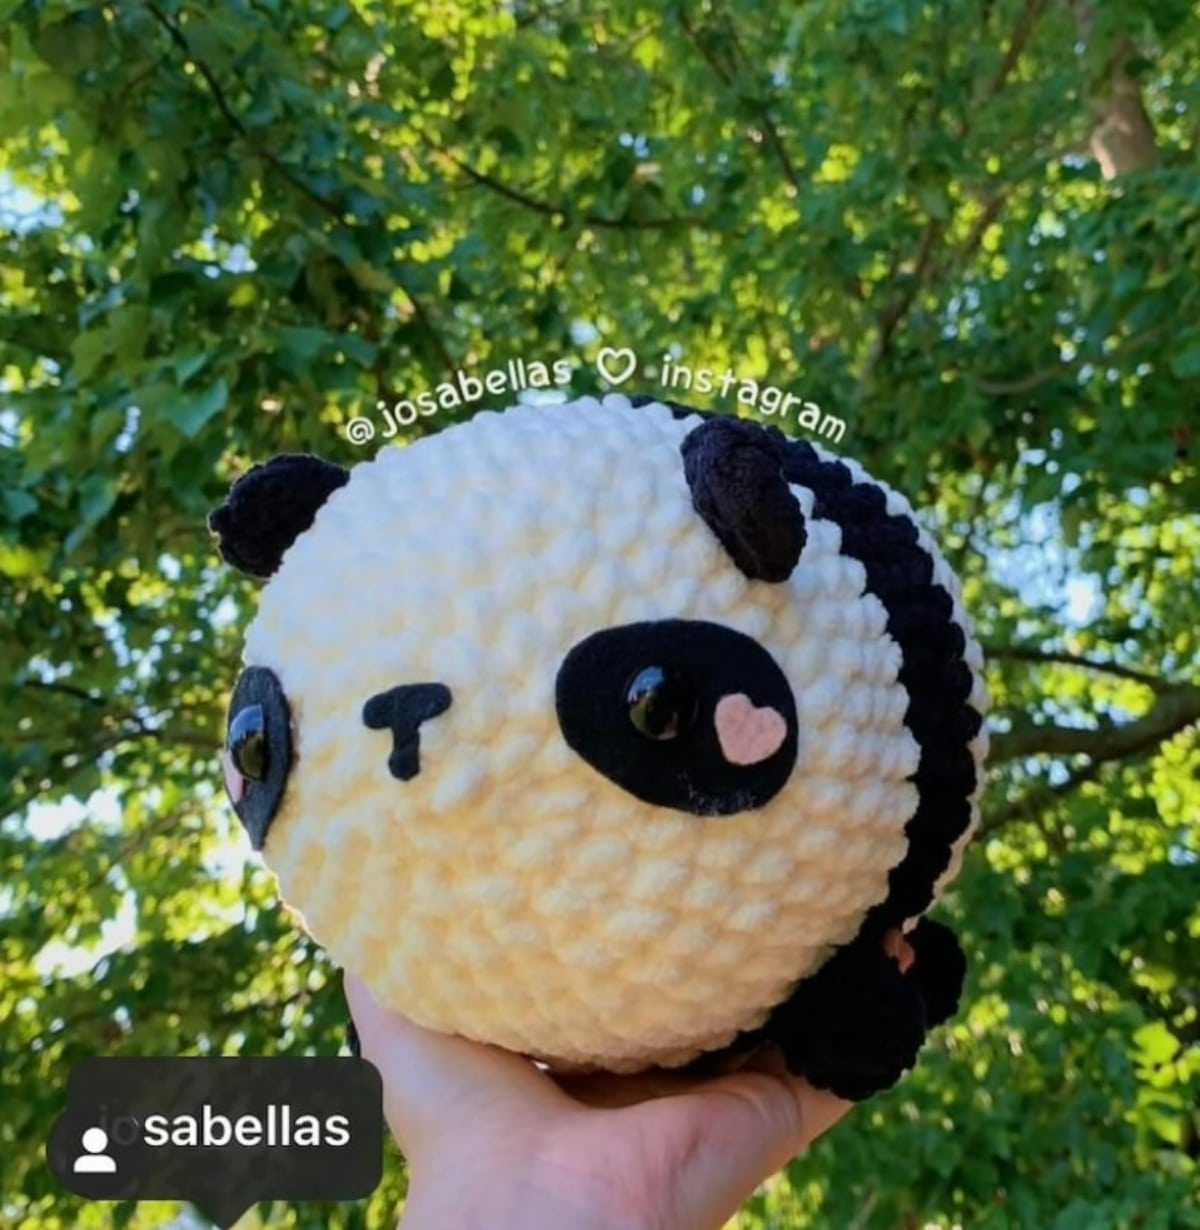 Large oval shaped crochet panda with pink hearts next to its eyes and a bobbled effect on its body held next to a tree. 